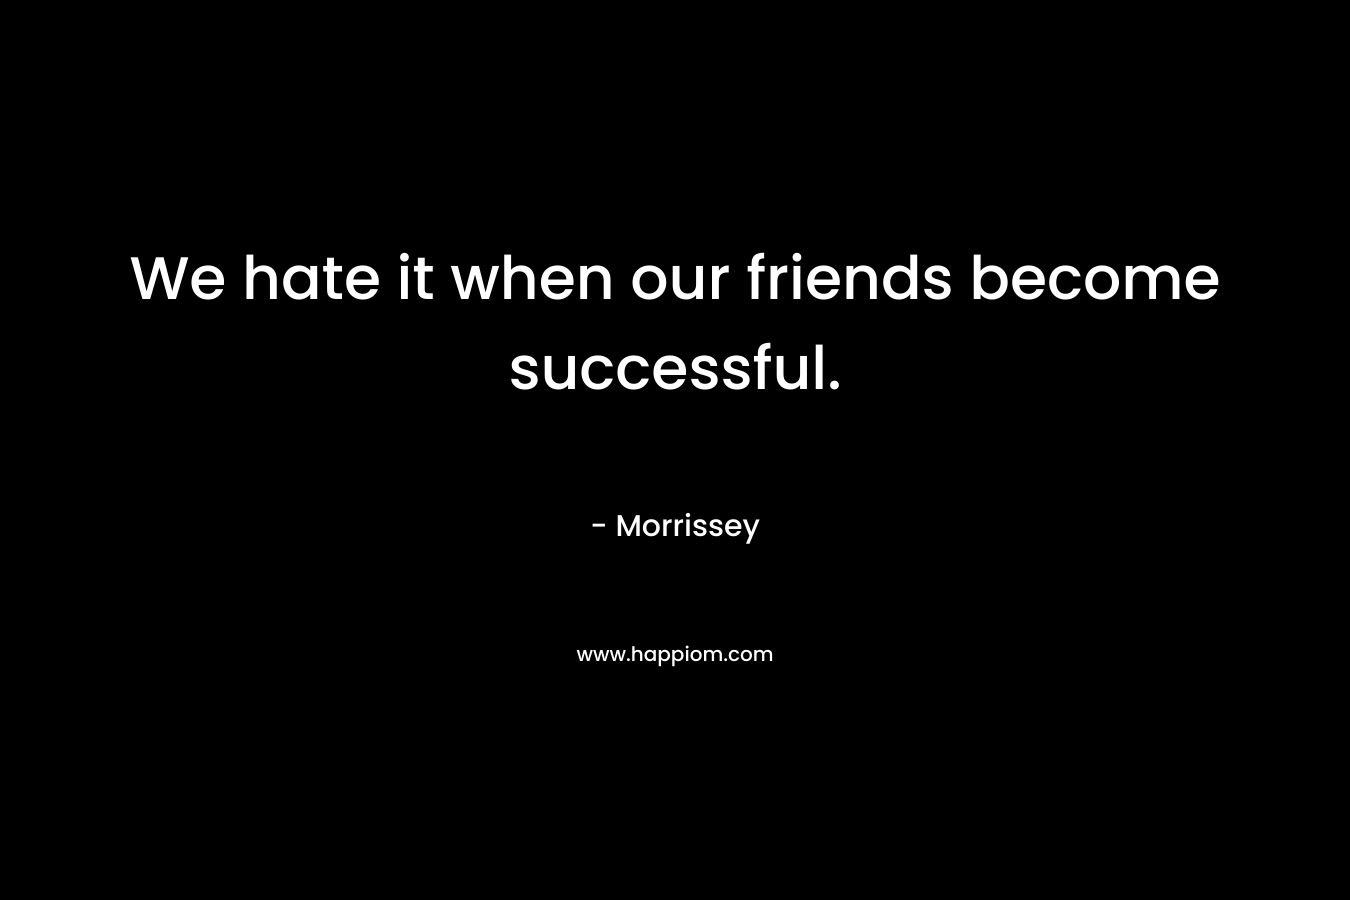 We hate it when our friends become successful. – Morrissey